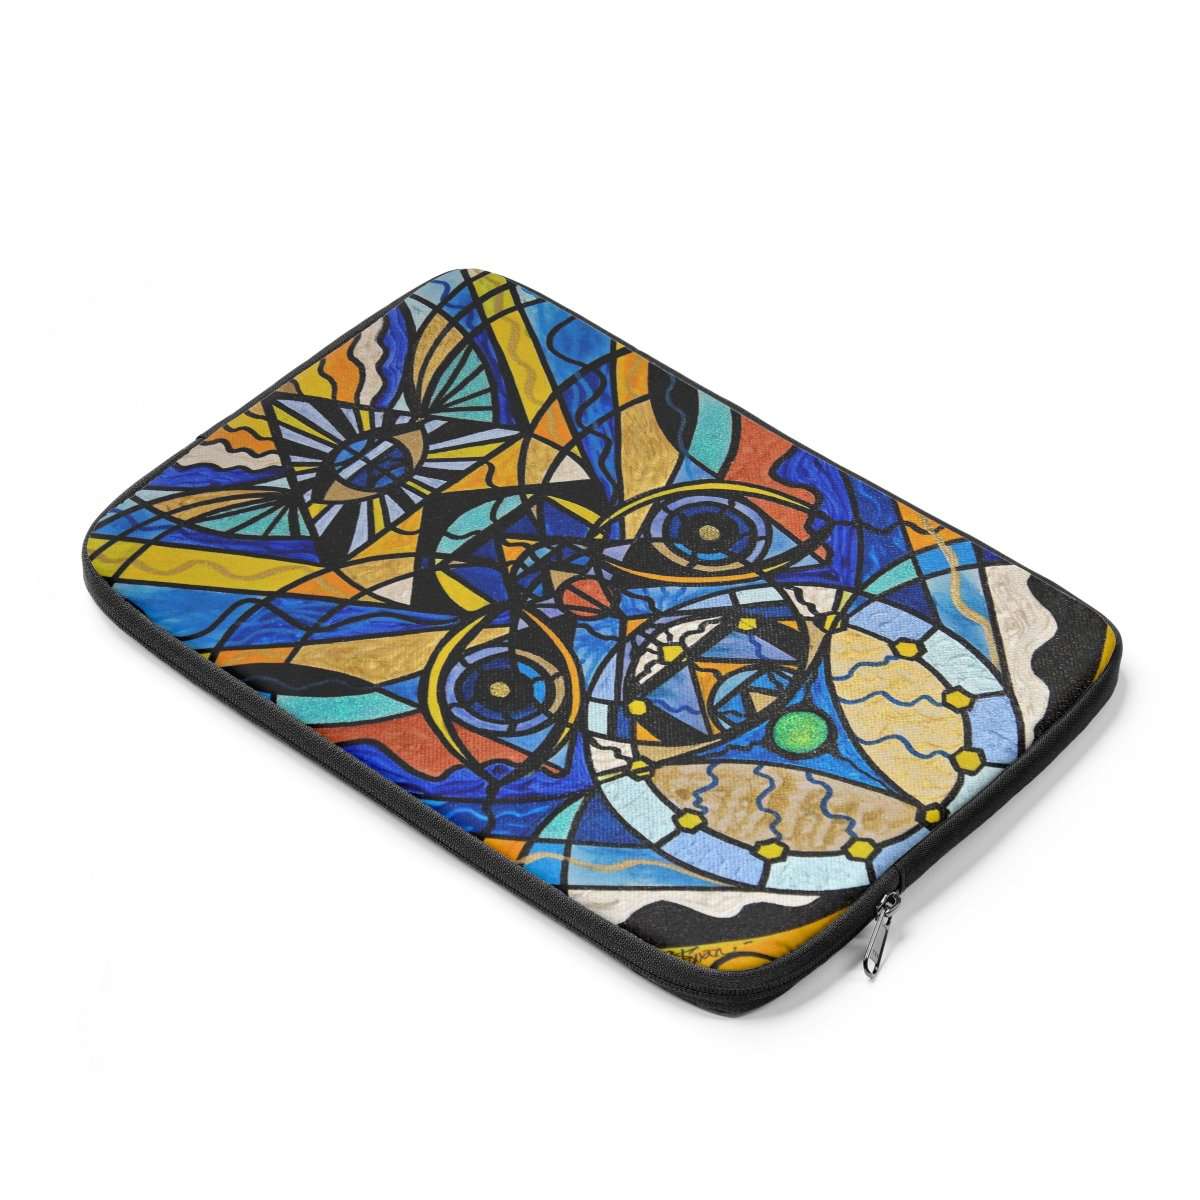 a-favorite-way-to-buy-sirian-solar-invocation-seal-laptop-sleeve-online_1.jpg